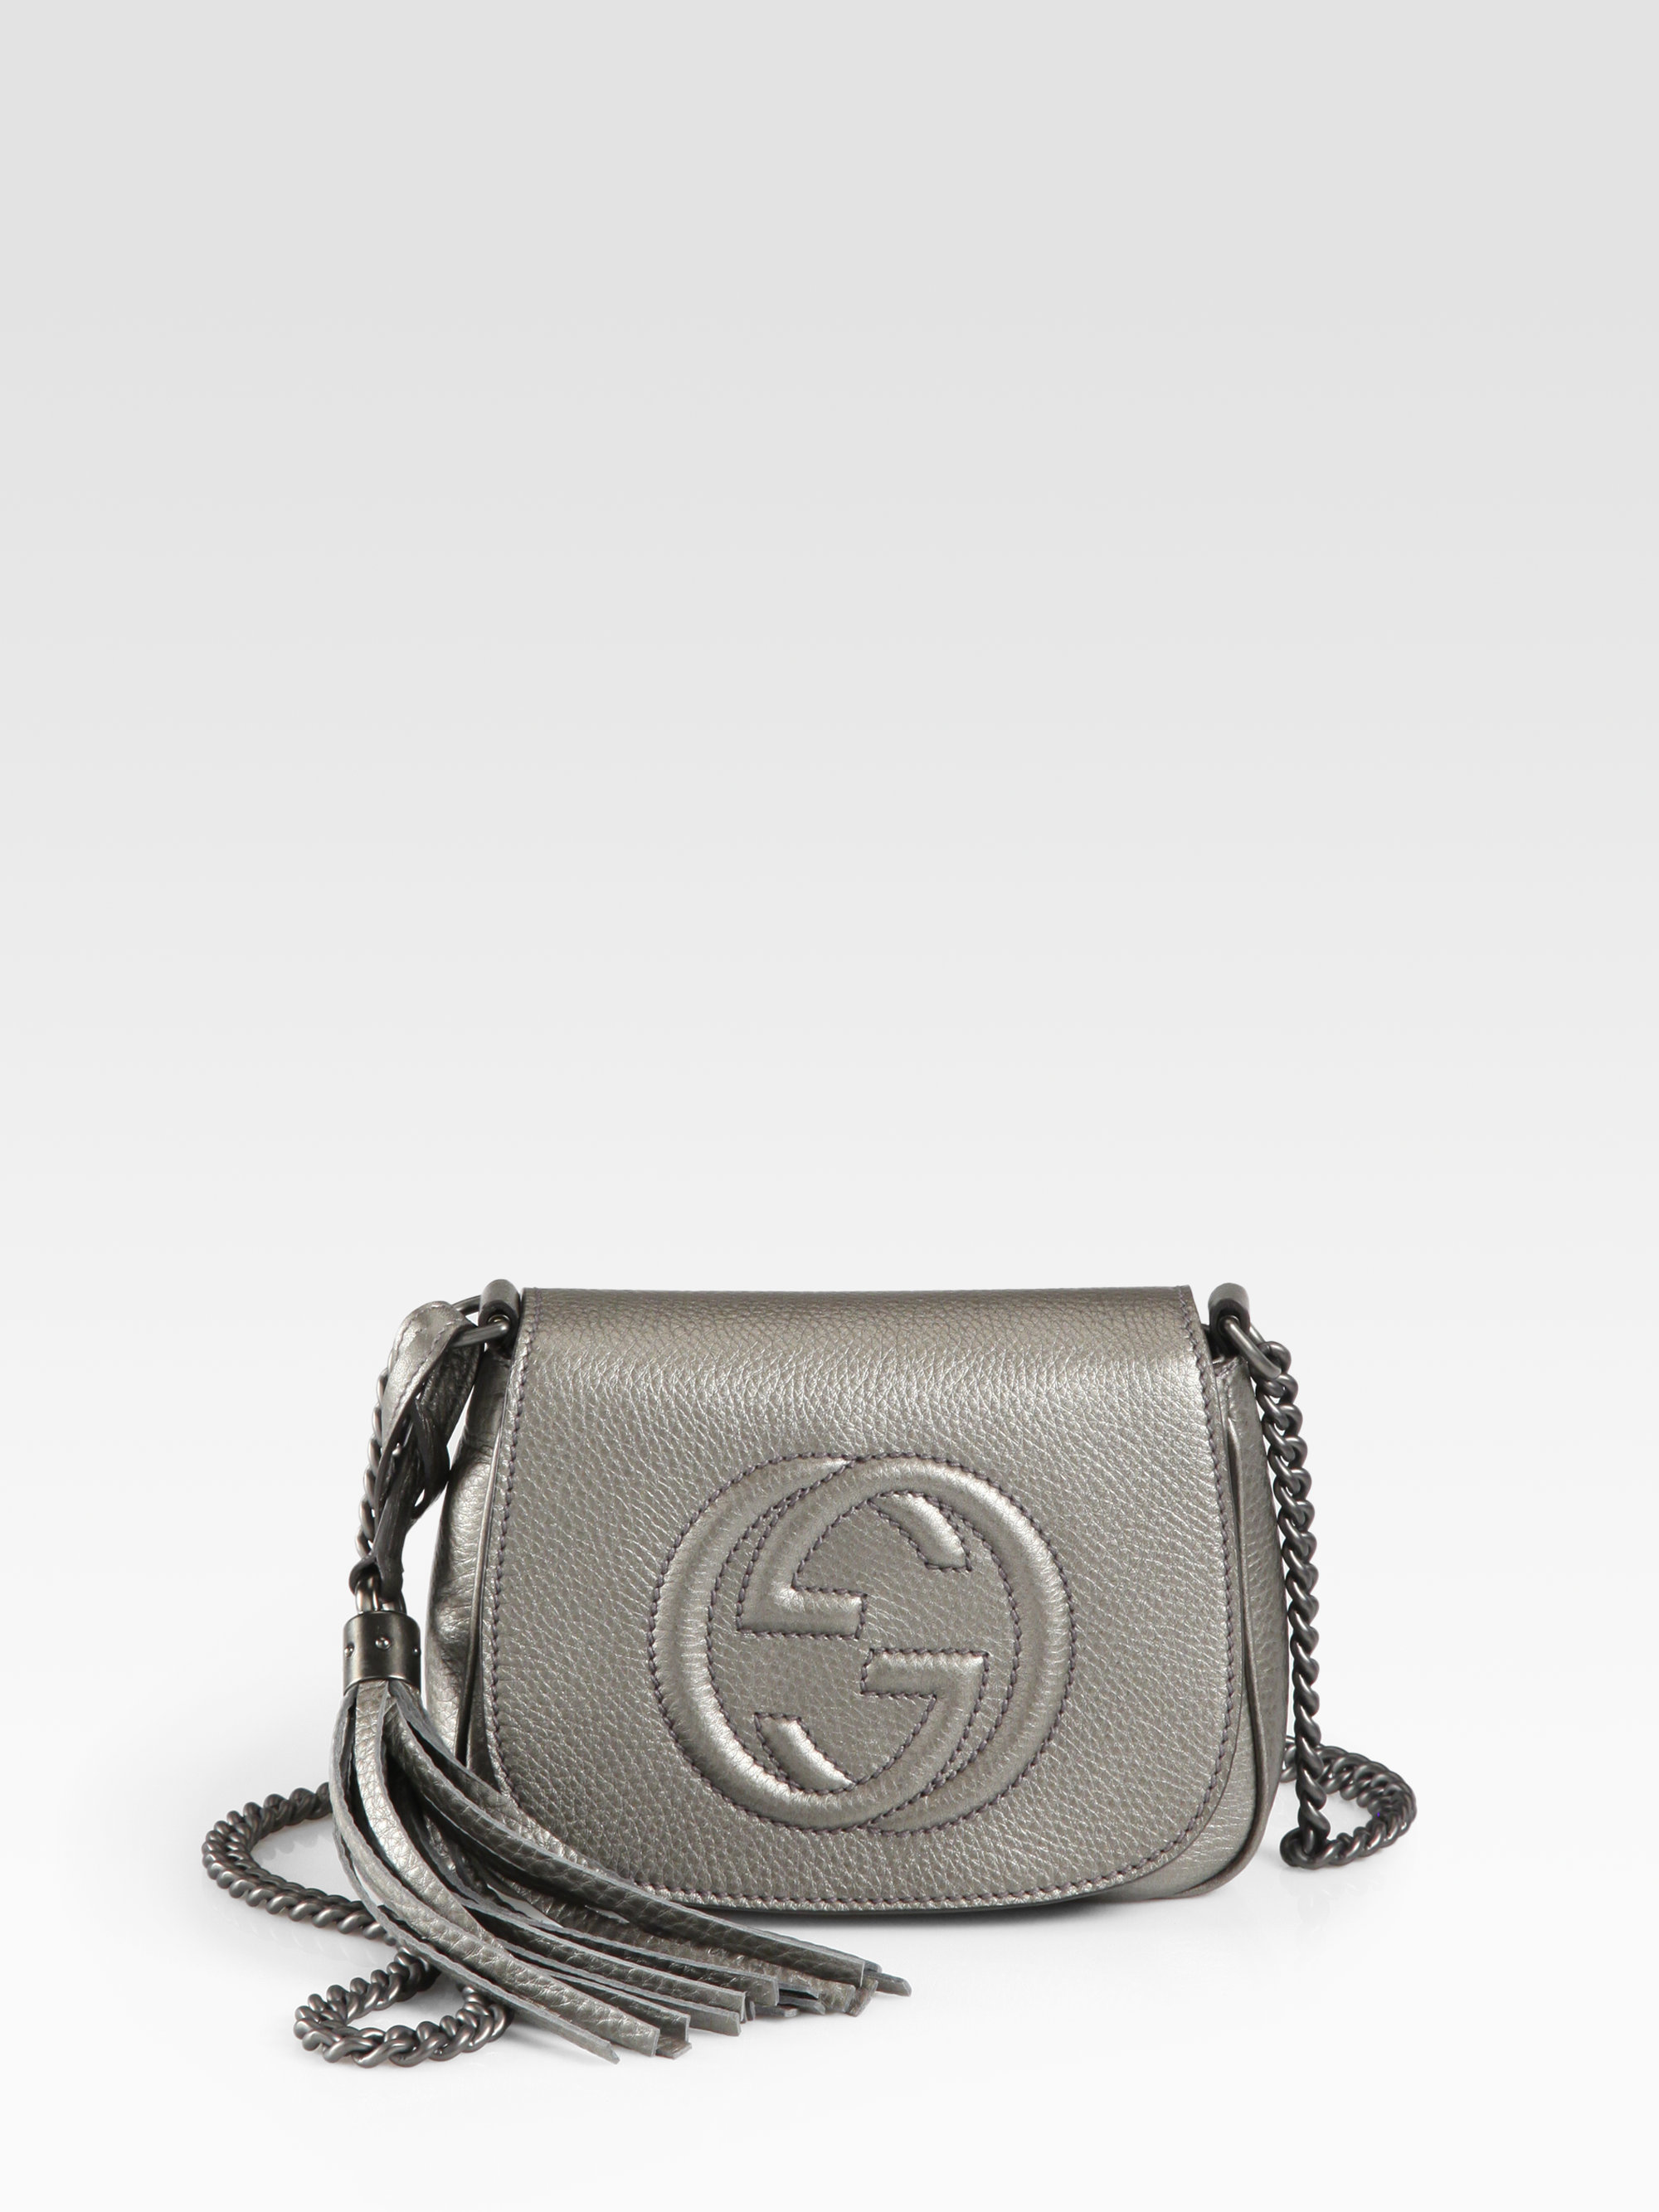 bloomingdale's gucci wallet,Save up to 18%,www.ilcascinone.com